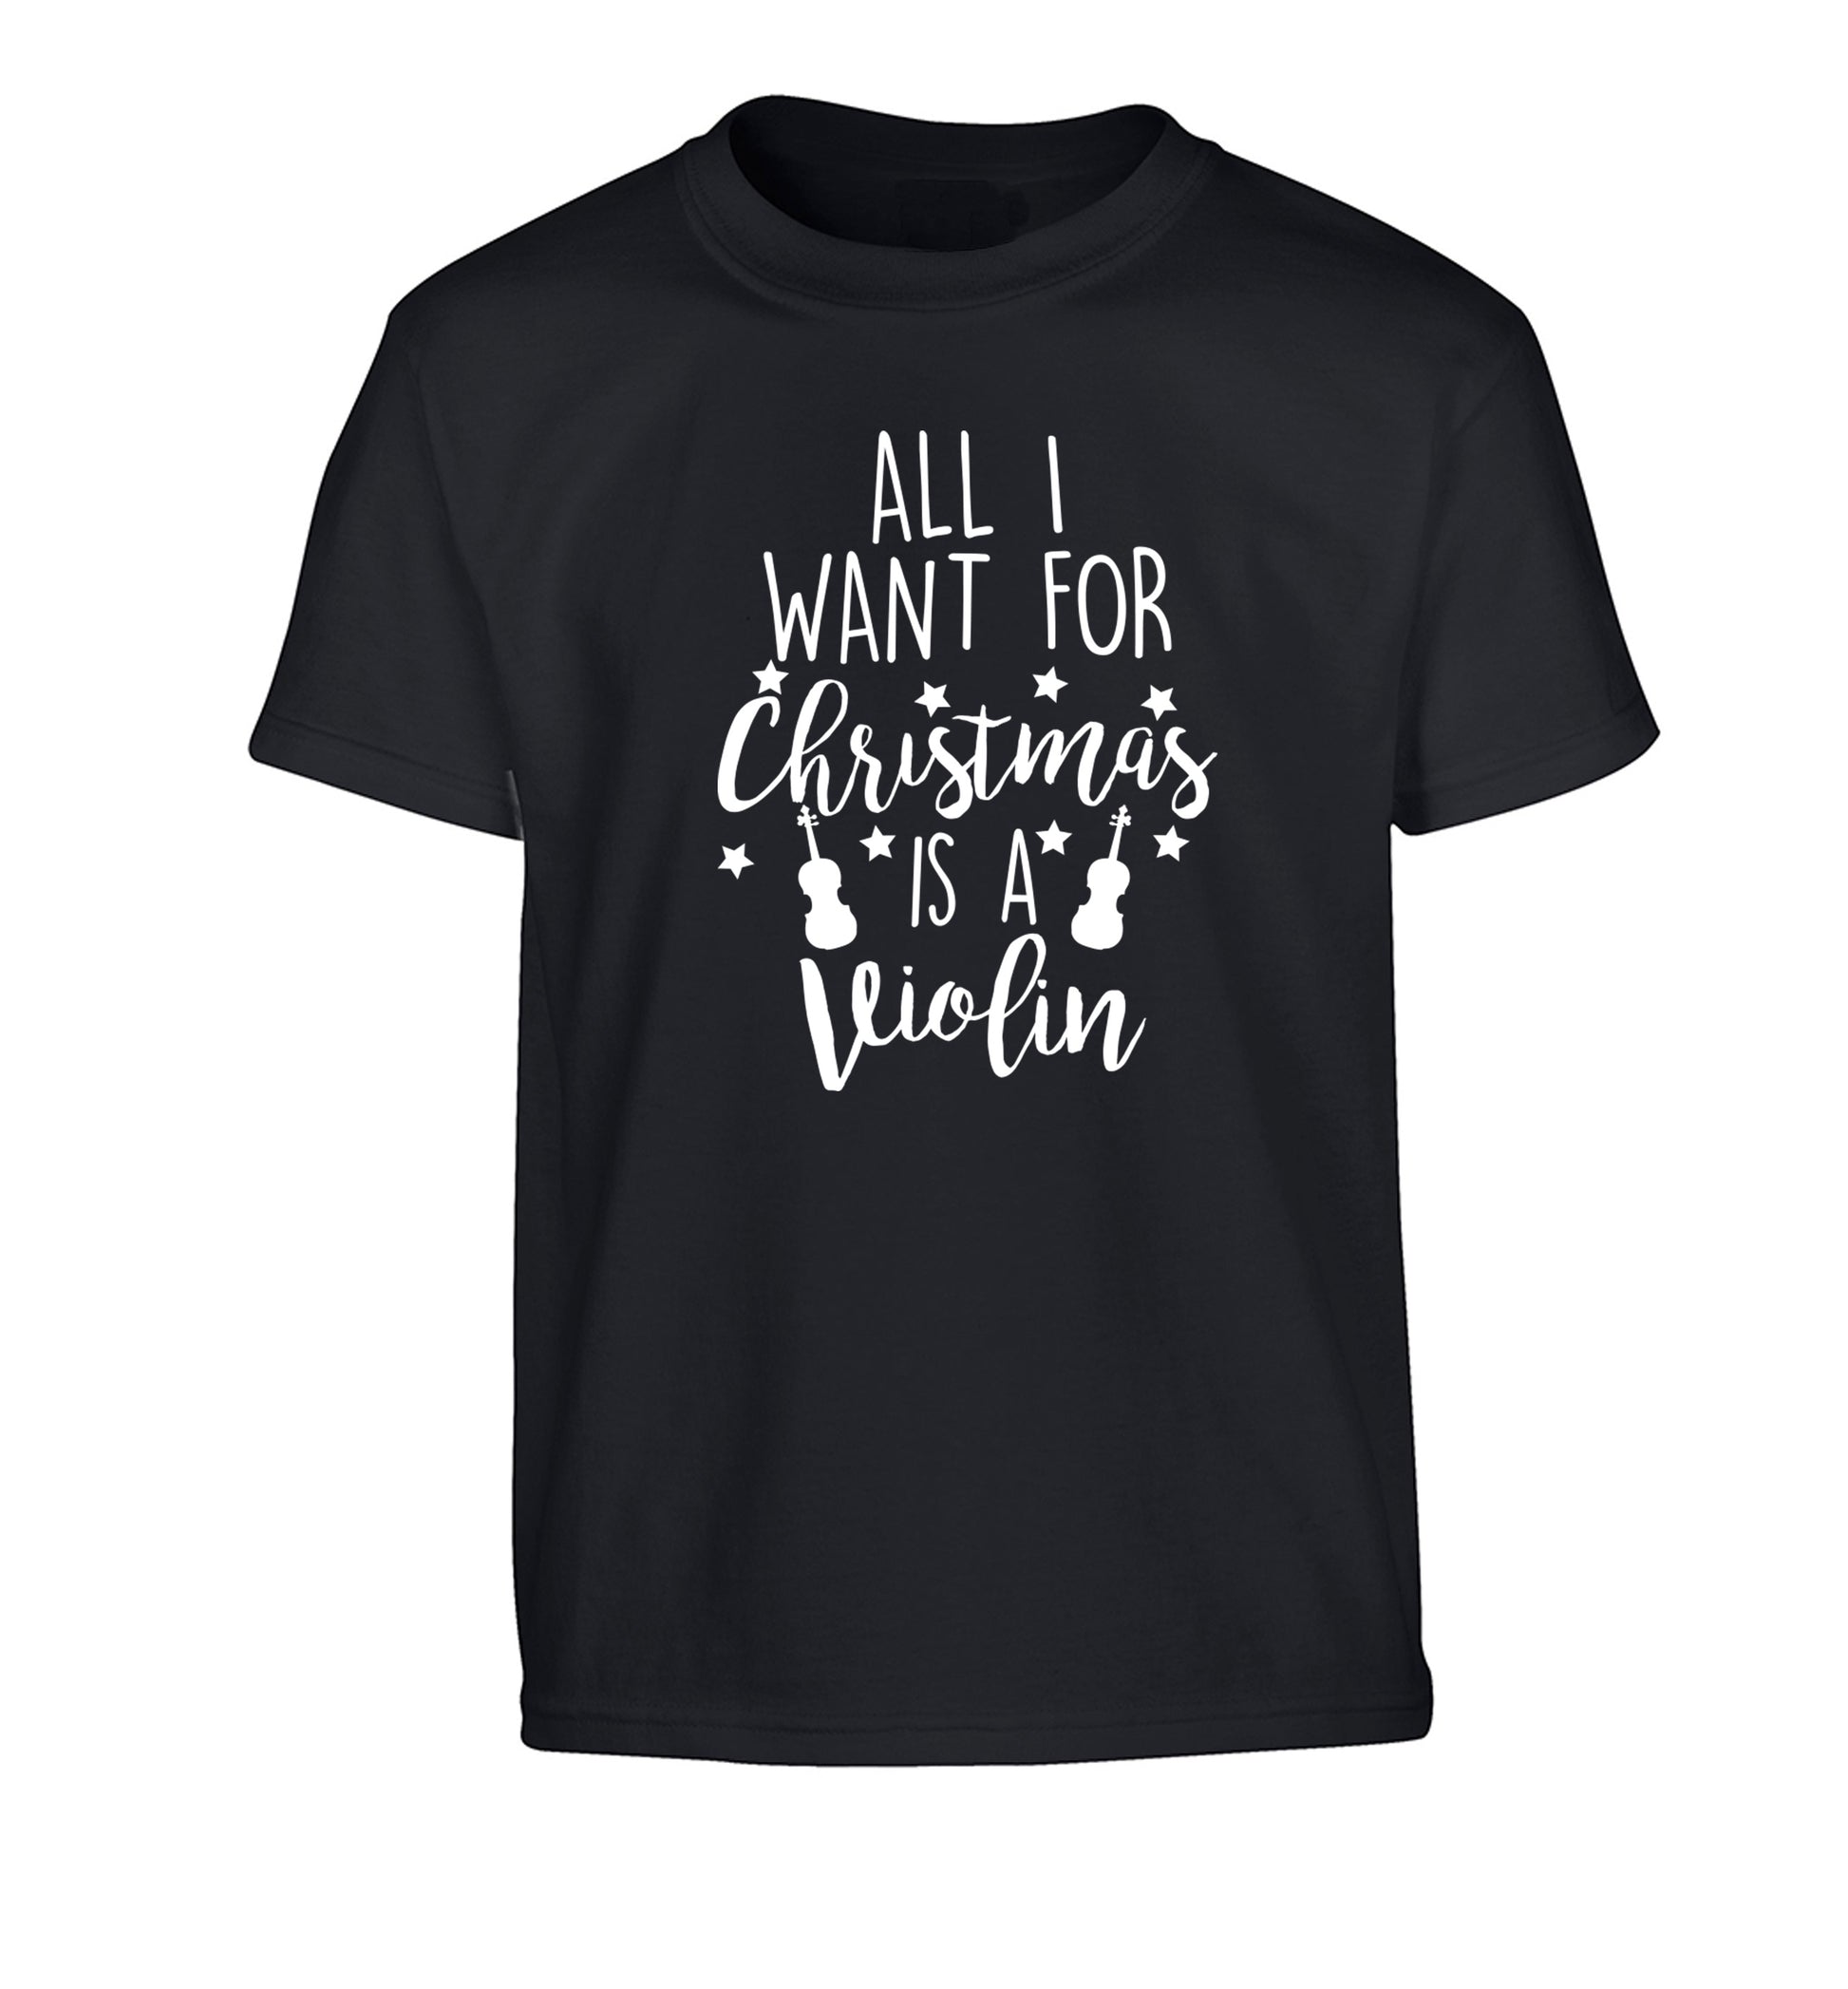 All I Want For Christmas is a Violin Children's black Tshirt 12-13 Years